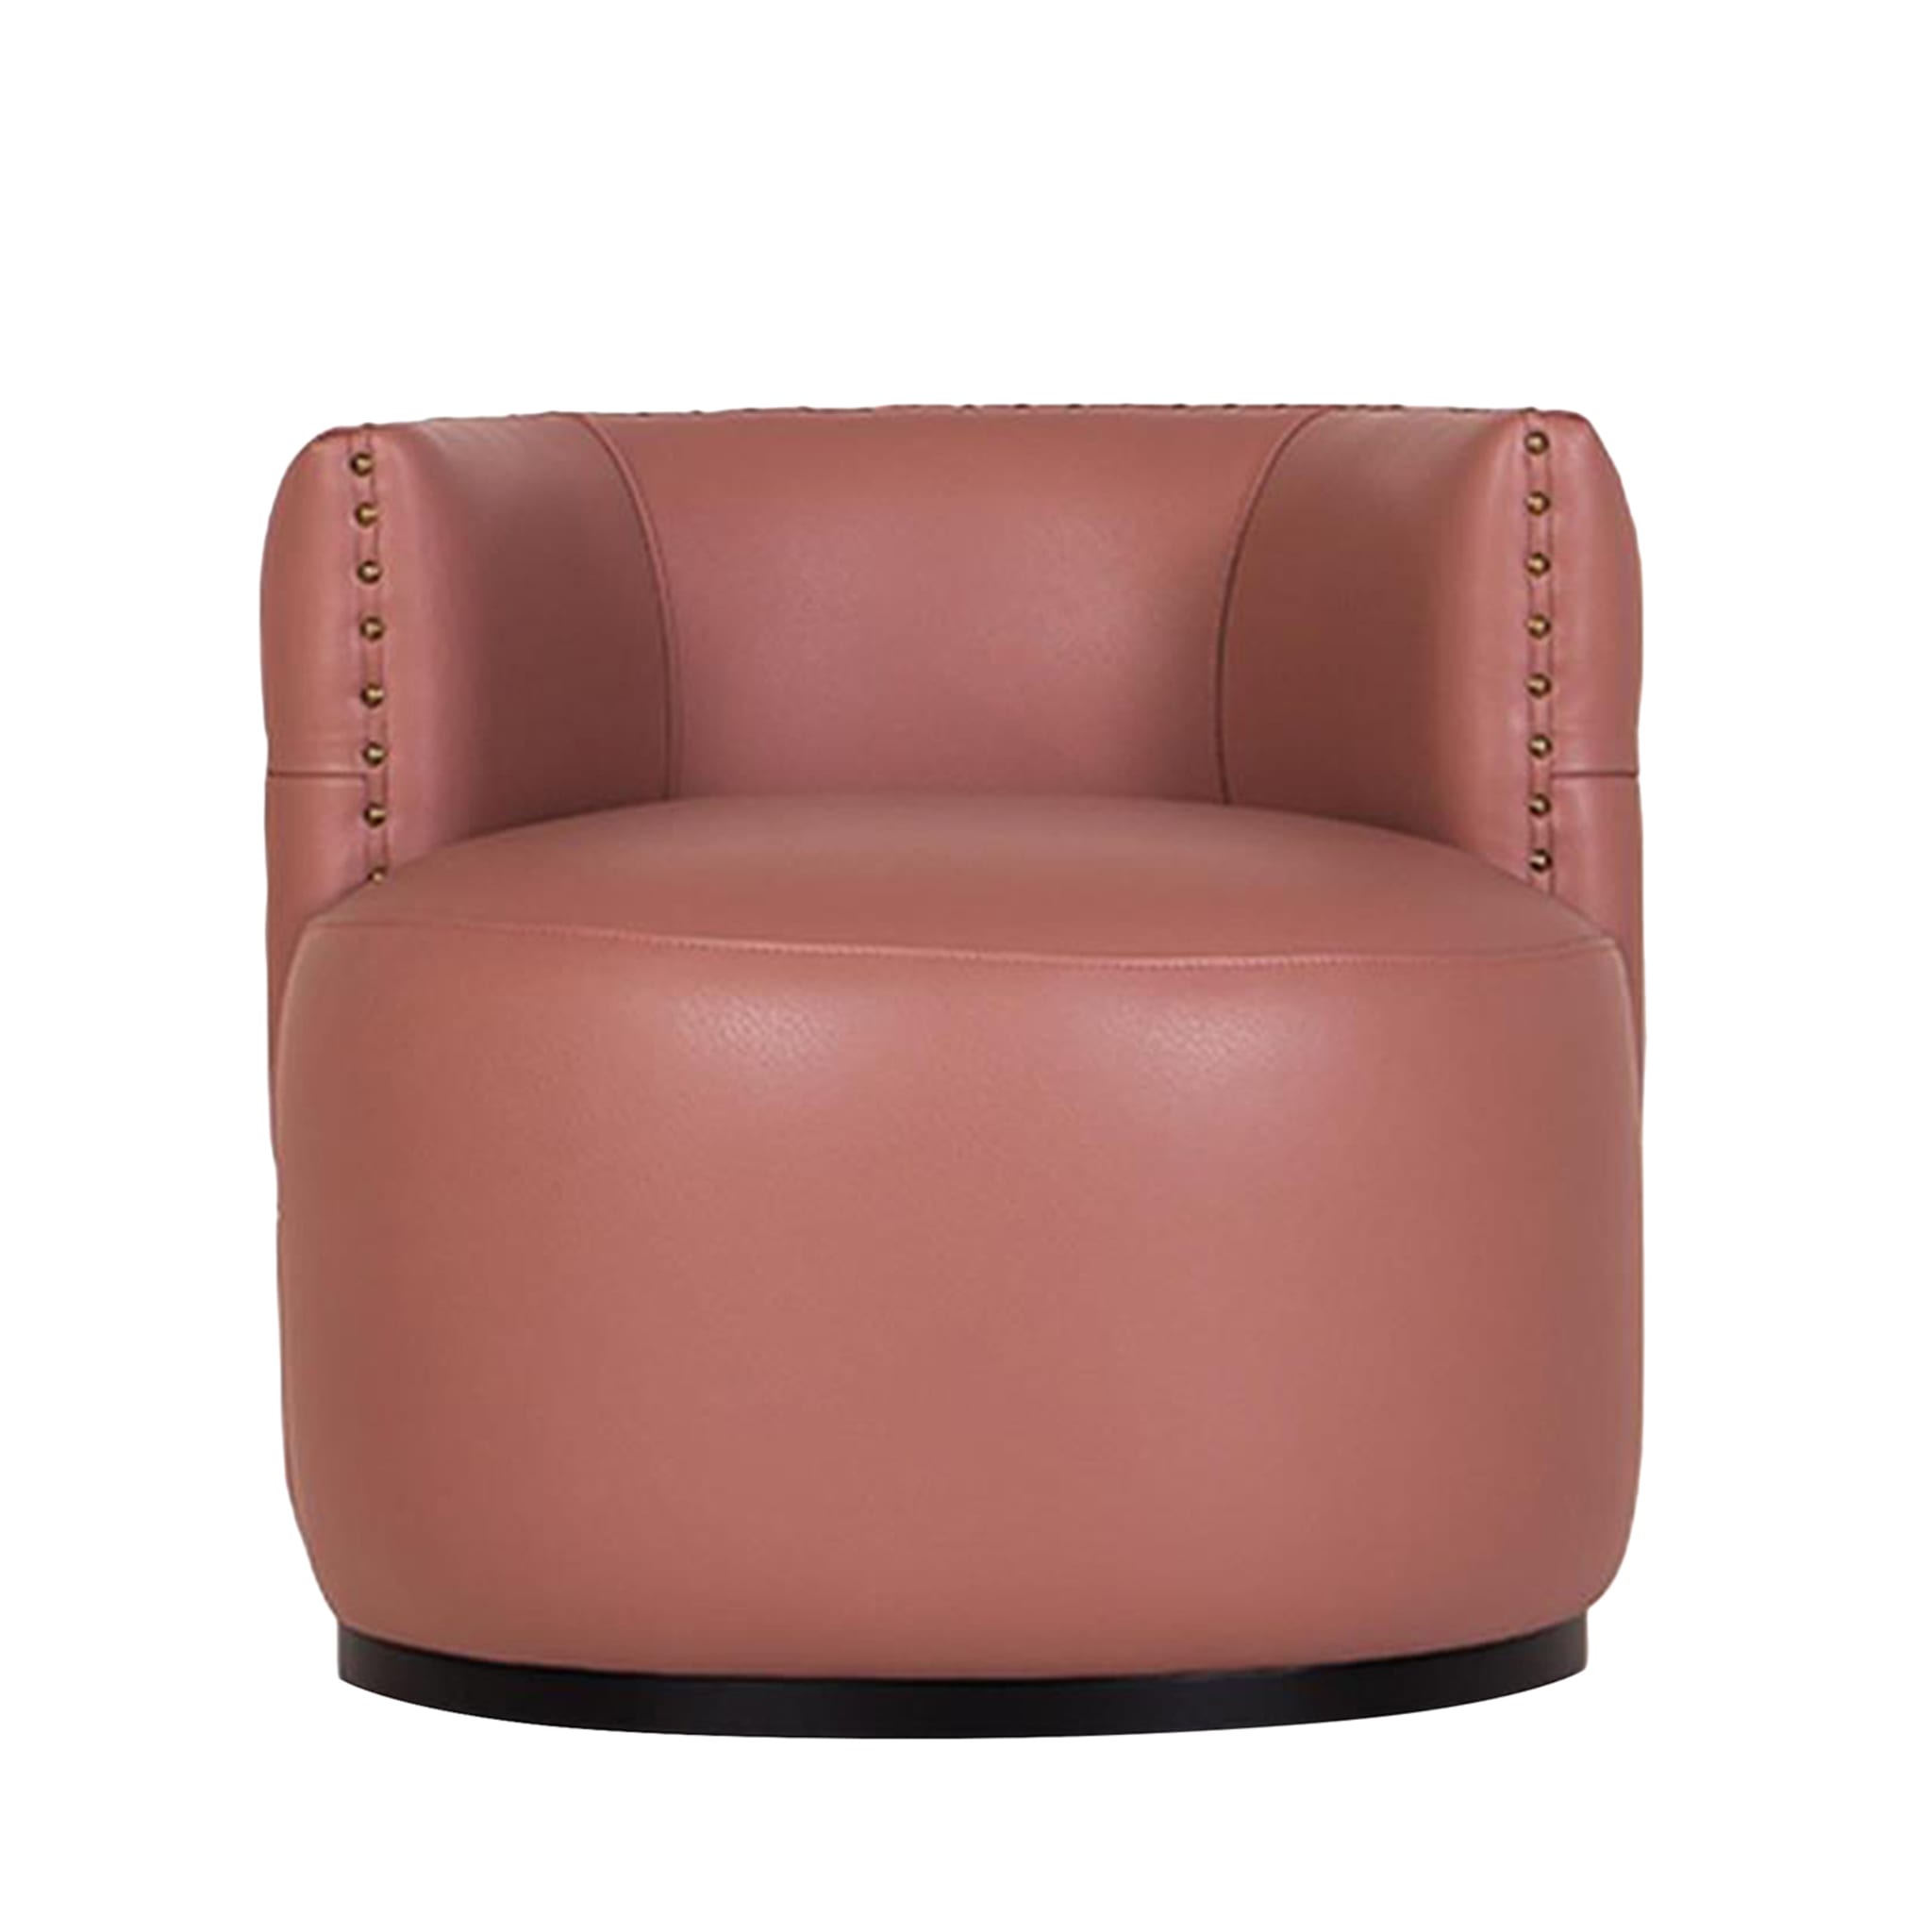 Petra Leather Armchair by Marco & Giulio Mantellassi - Main view